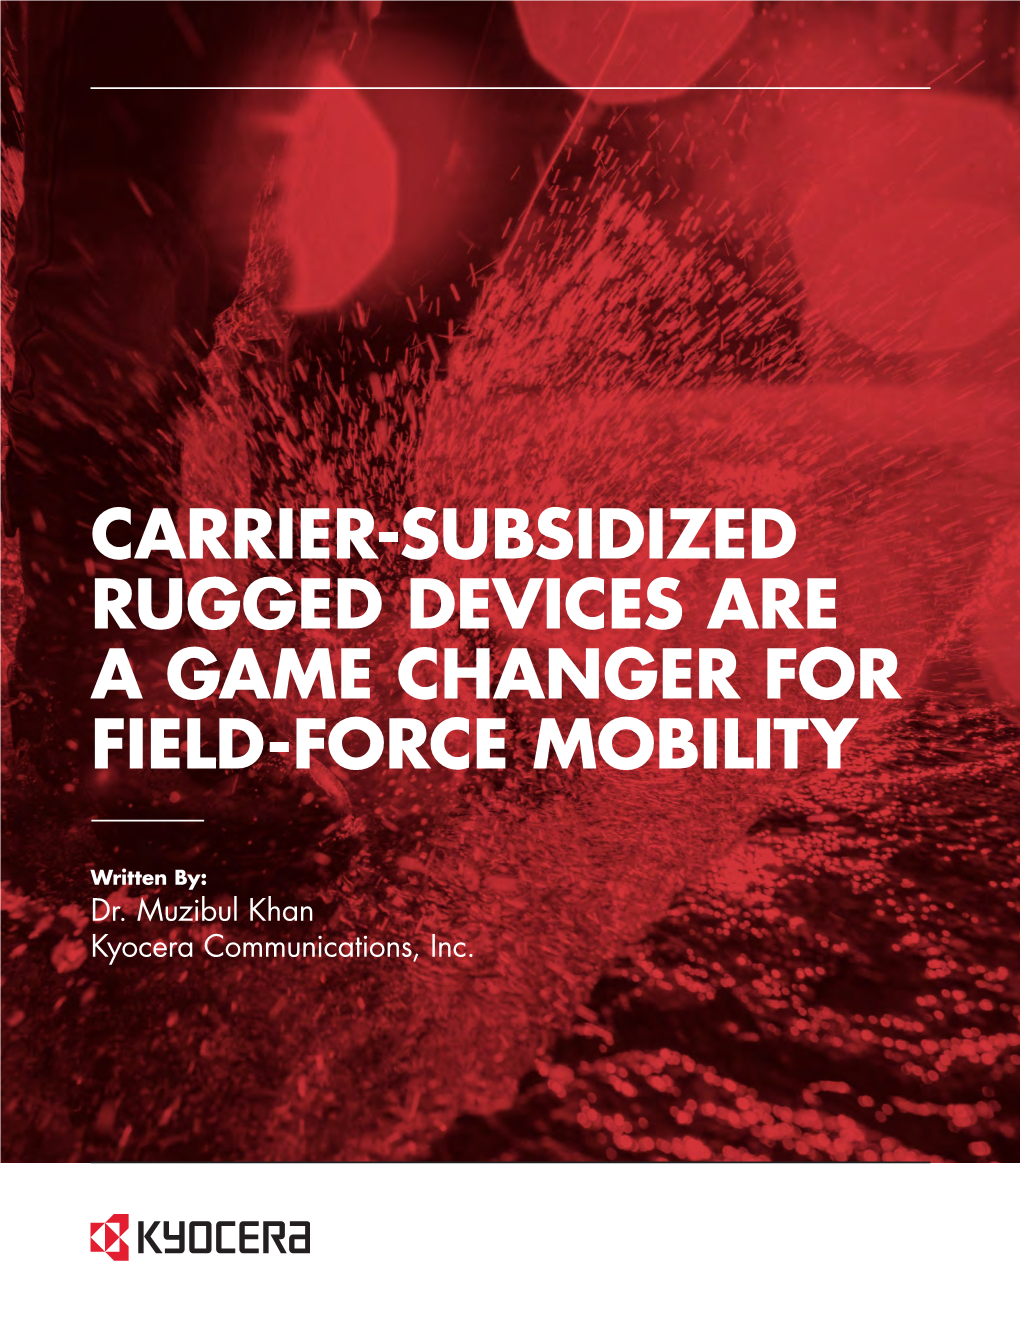 Carrier-Subsidized Rugged Devices Are a Game Changer for Field-Force Mobility